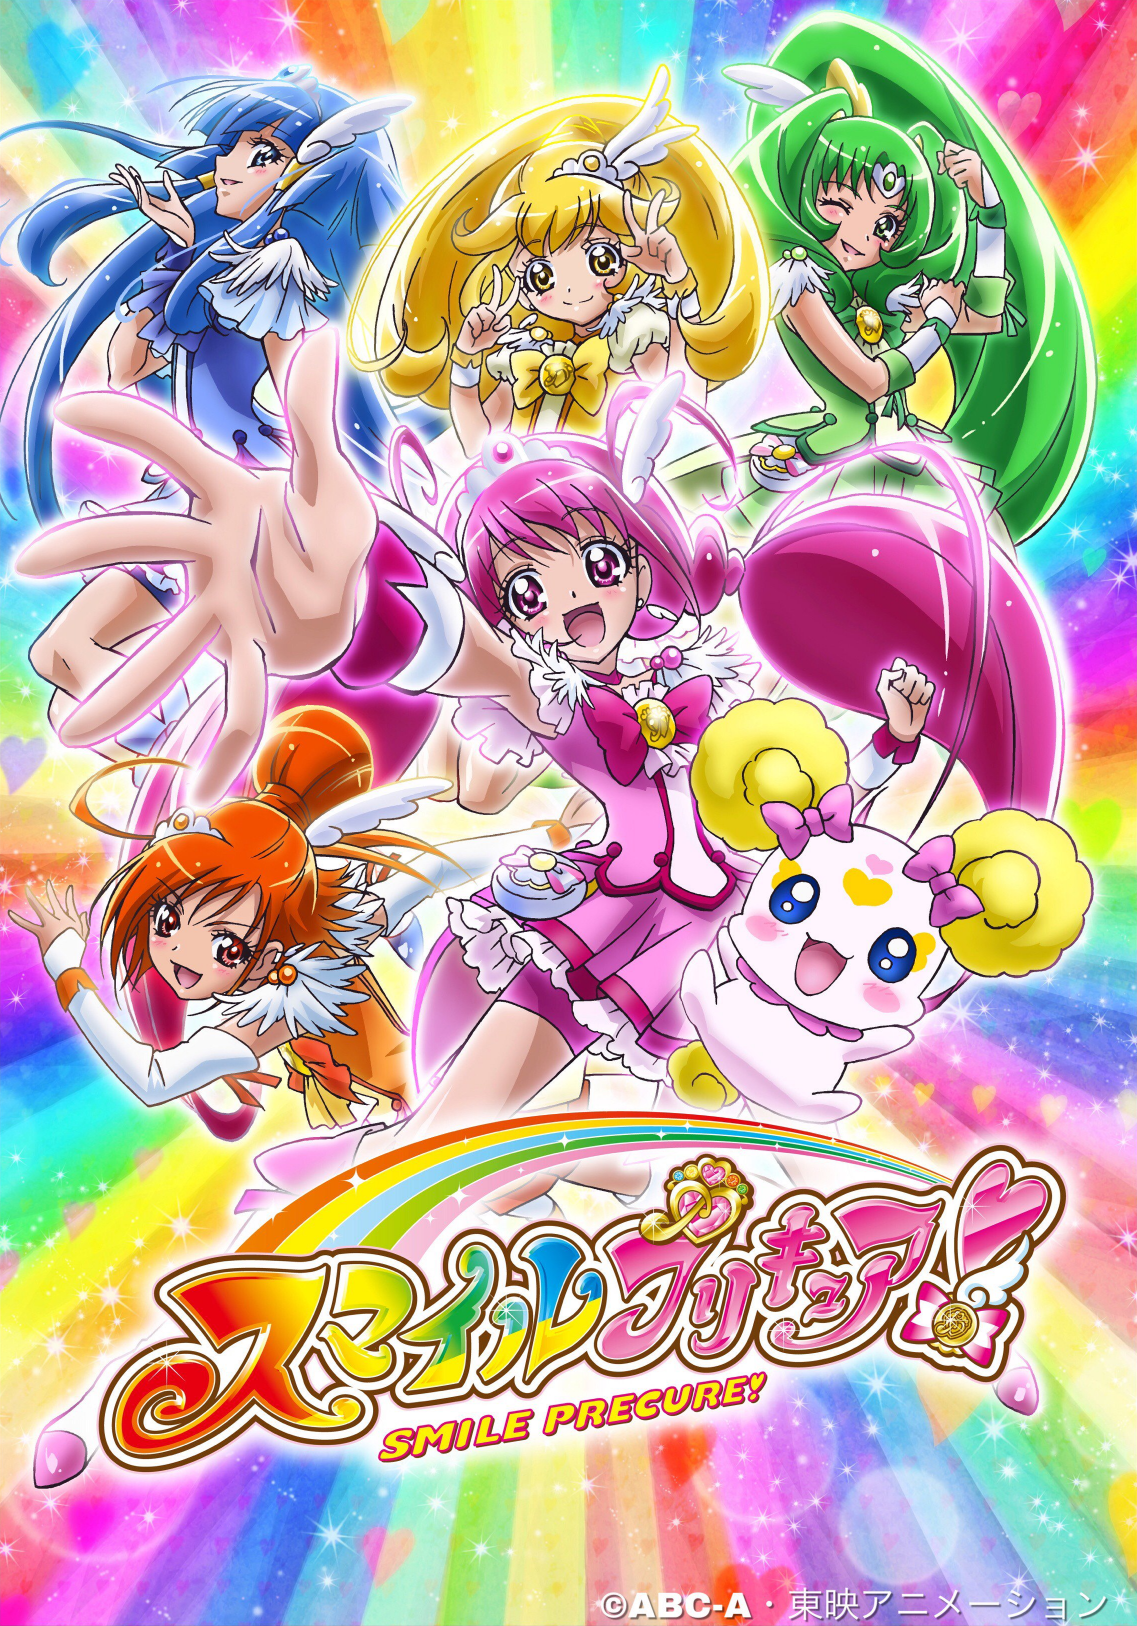 Stream Happiness Charge Pretty Cure Ending Credits 1  Precure Memory  Precure All Stars 2015 Version by The Anime and Disney Boy Fan 2022   Listen online for free on SoundCloud